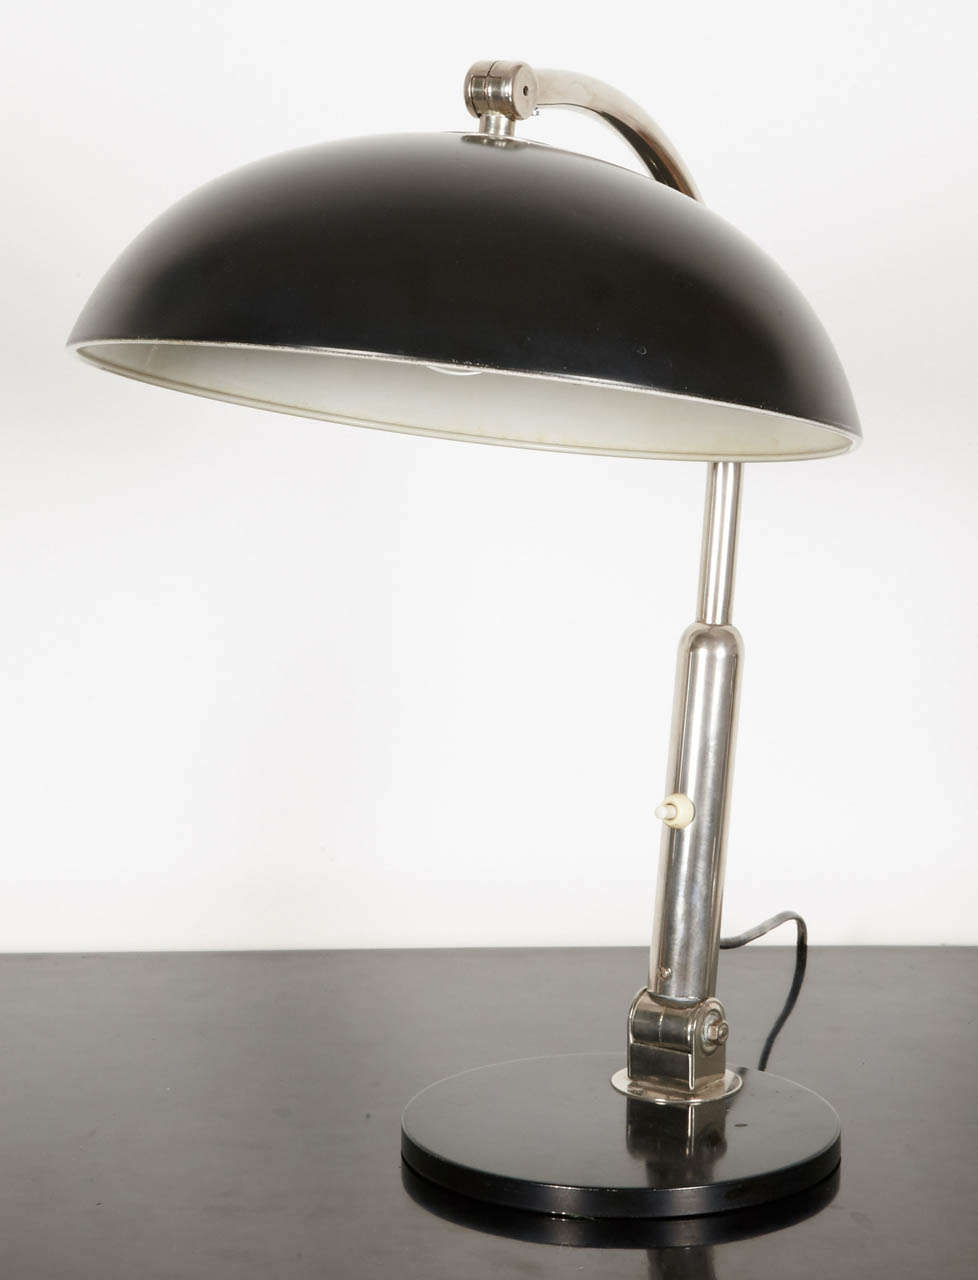 Steel table lamp. Black lacquered base and shade, double articulated nickel plated arm. This model was designed by H.TH.J.A. Busquet and edited by Hala (Hannoversche Lampenwerke). Bauhaus circa 1930. Wired for European use.